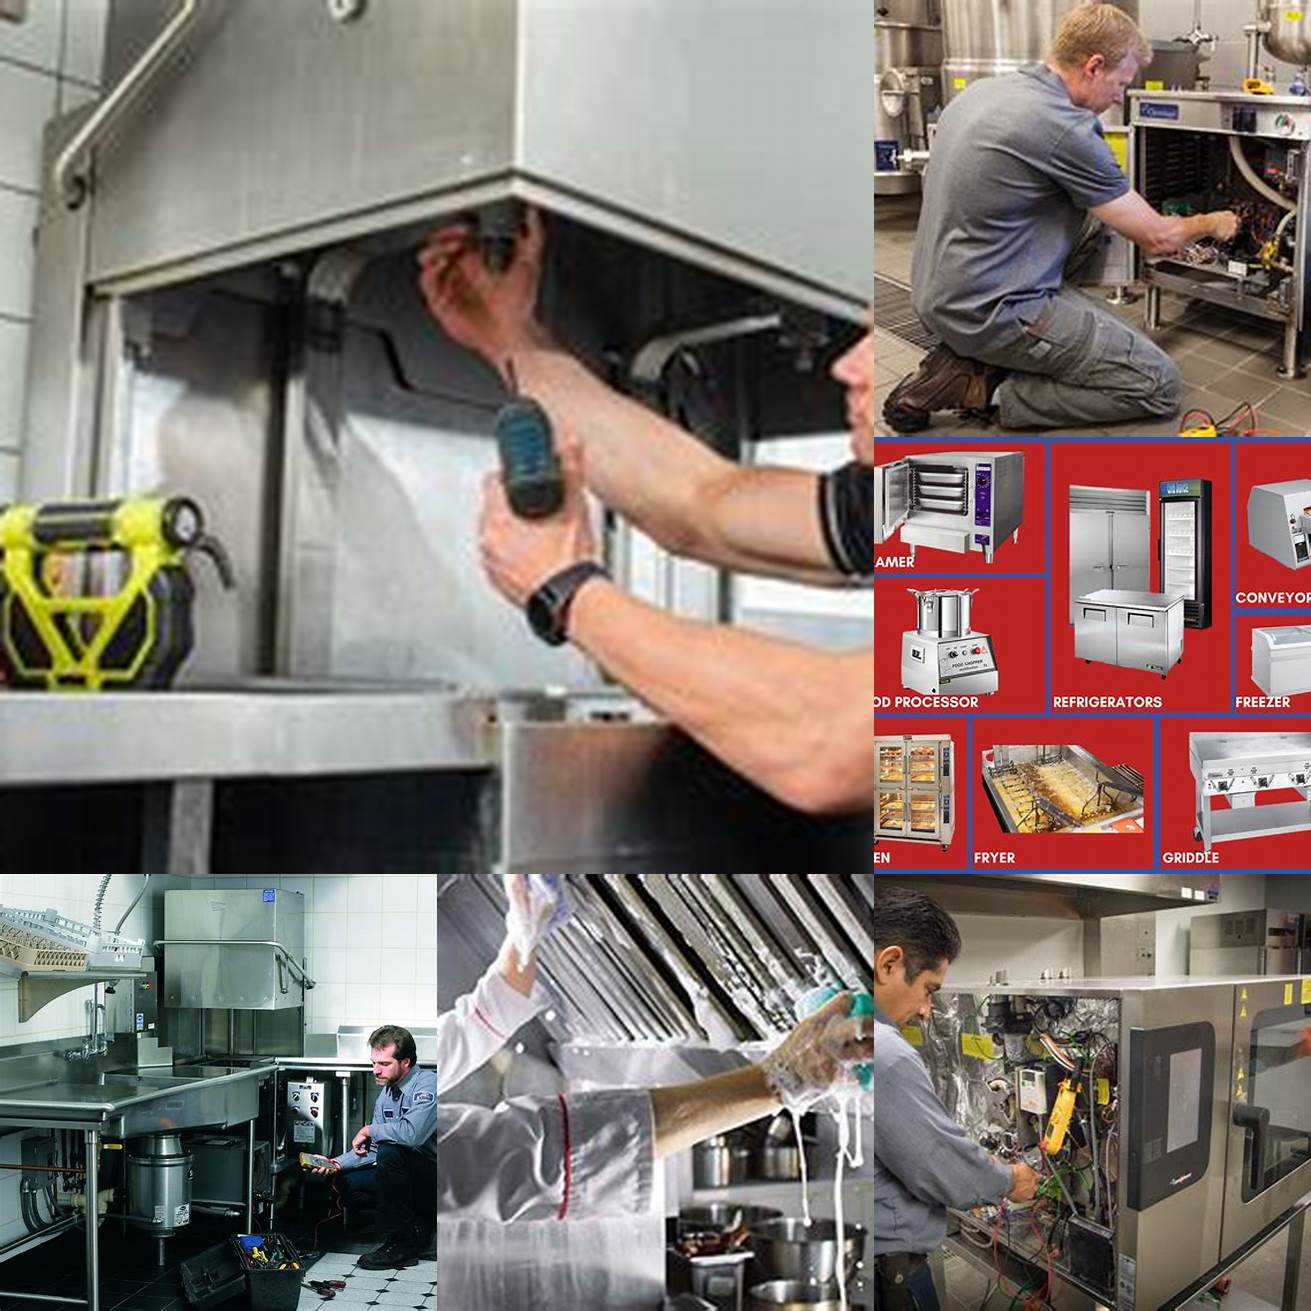 4 Maintenance and repairs Commercial kitchen equipment can be expensive to repair or replace and regular maintenance is essential to keep it running smoothly